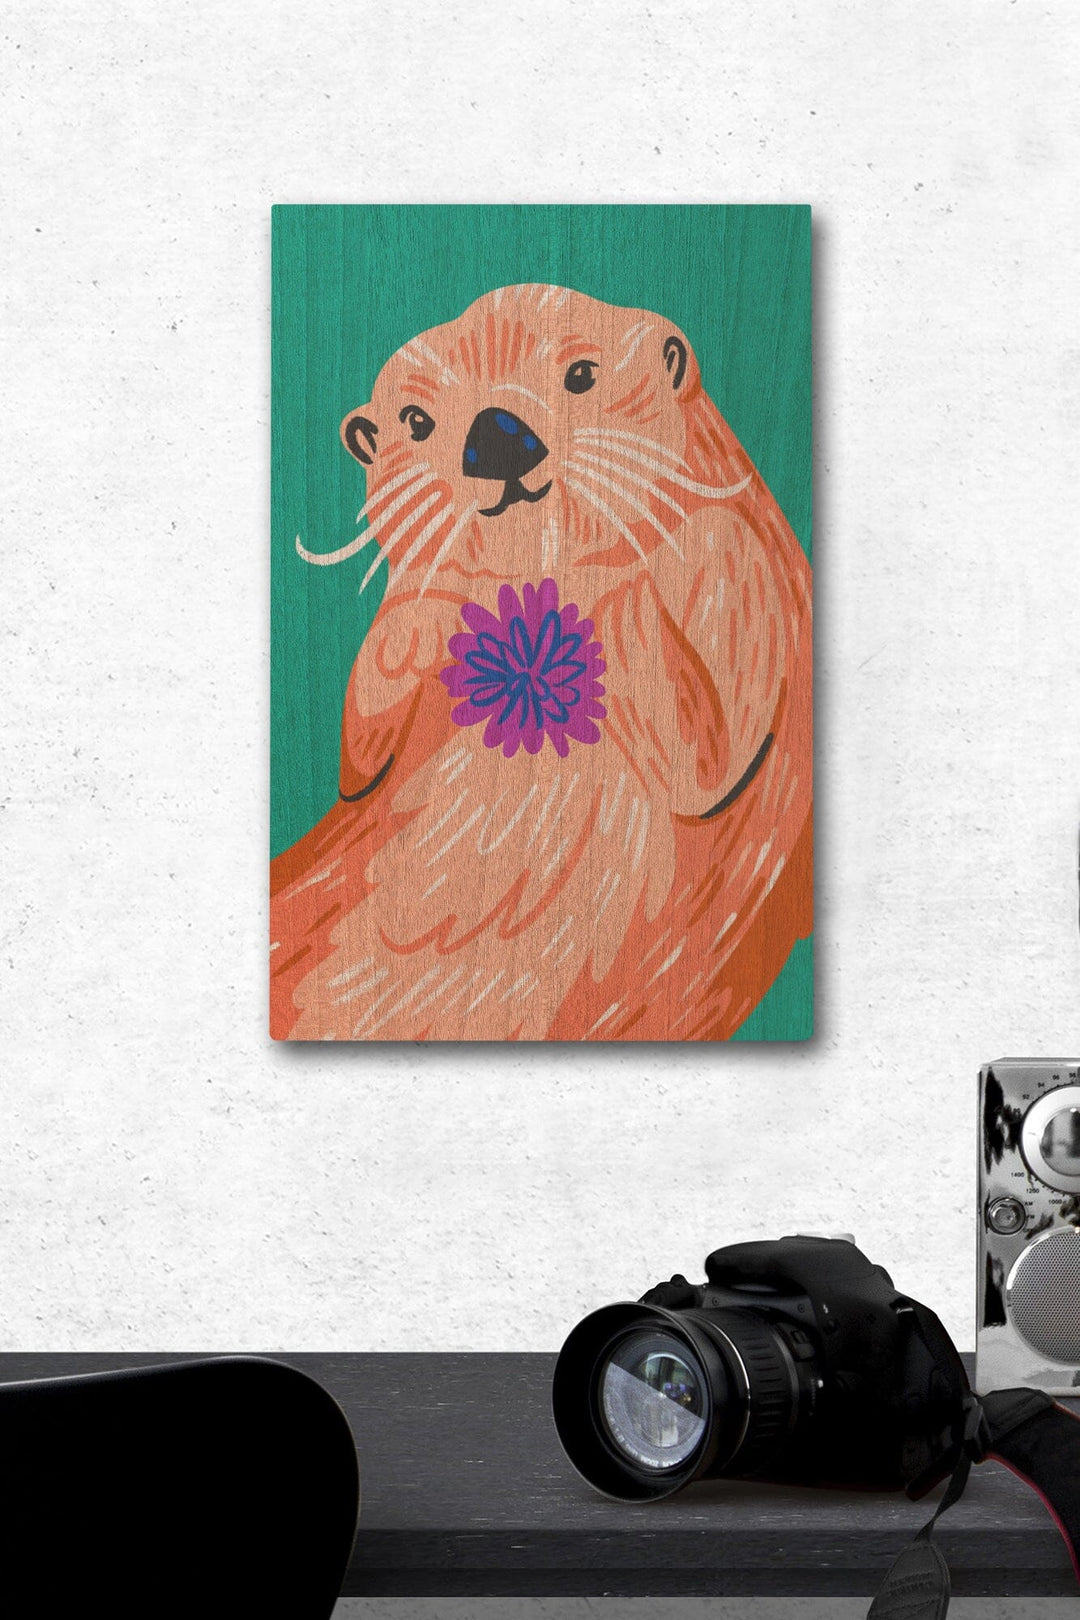 Lush Environment Collection, Sea Otter Portrait, Wood Signs and Postcards Wood Lantern Press 12 x 18 Wood Gallery Print 